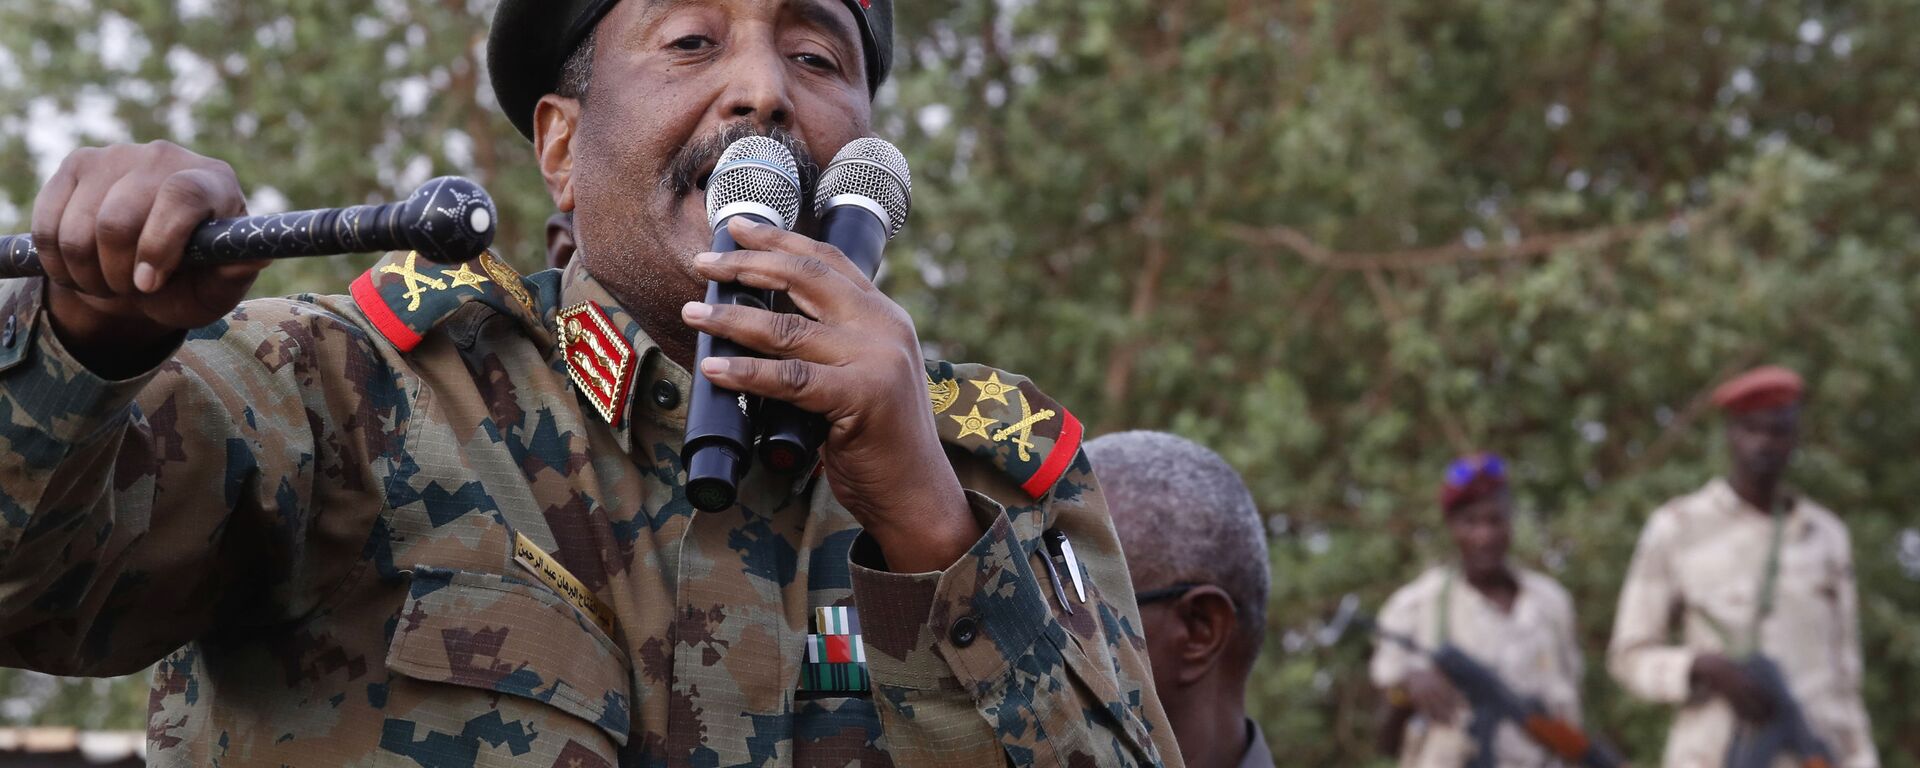 In this June 29, 2019, file photo, Sudanese Gen. Abdel-Fattah Burhan, head of the military council, speaks during a military-backed rally, in Omdurman district, west of Khartoum, Sudan. An African Union envoy says Sudan's ruling military council and the country's pro-democracy movement have reached a power-sharing agreement, including a timetable for a transition to civilian rule. Mohammed el-Hassan Labat said early Friday, July 5, that both sides agreed to form a joint sovereign council that will rule the country for three years or a little more. The sides agreed to five seats for the military and five for civilians with an additional seat going to a civilian with military background. - Sputnik International, 1920, 25.10.2021